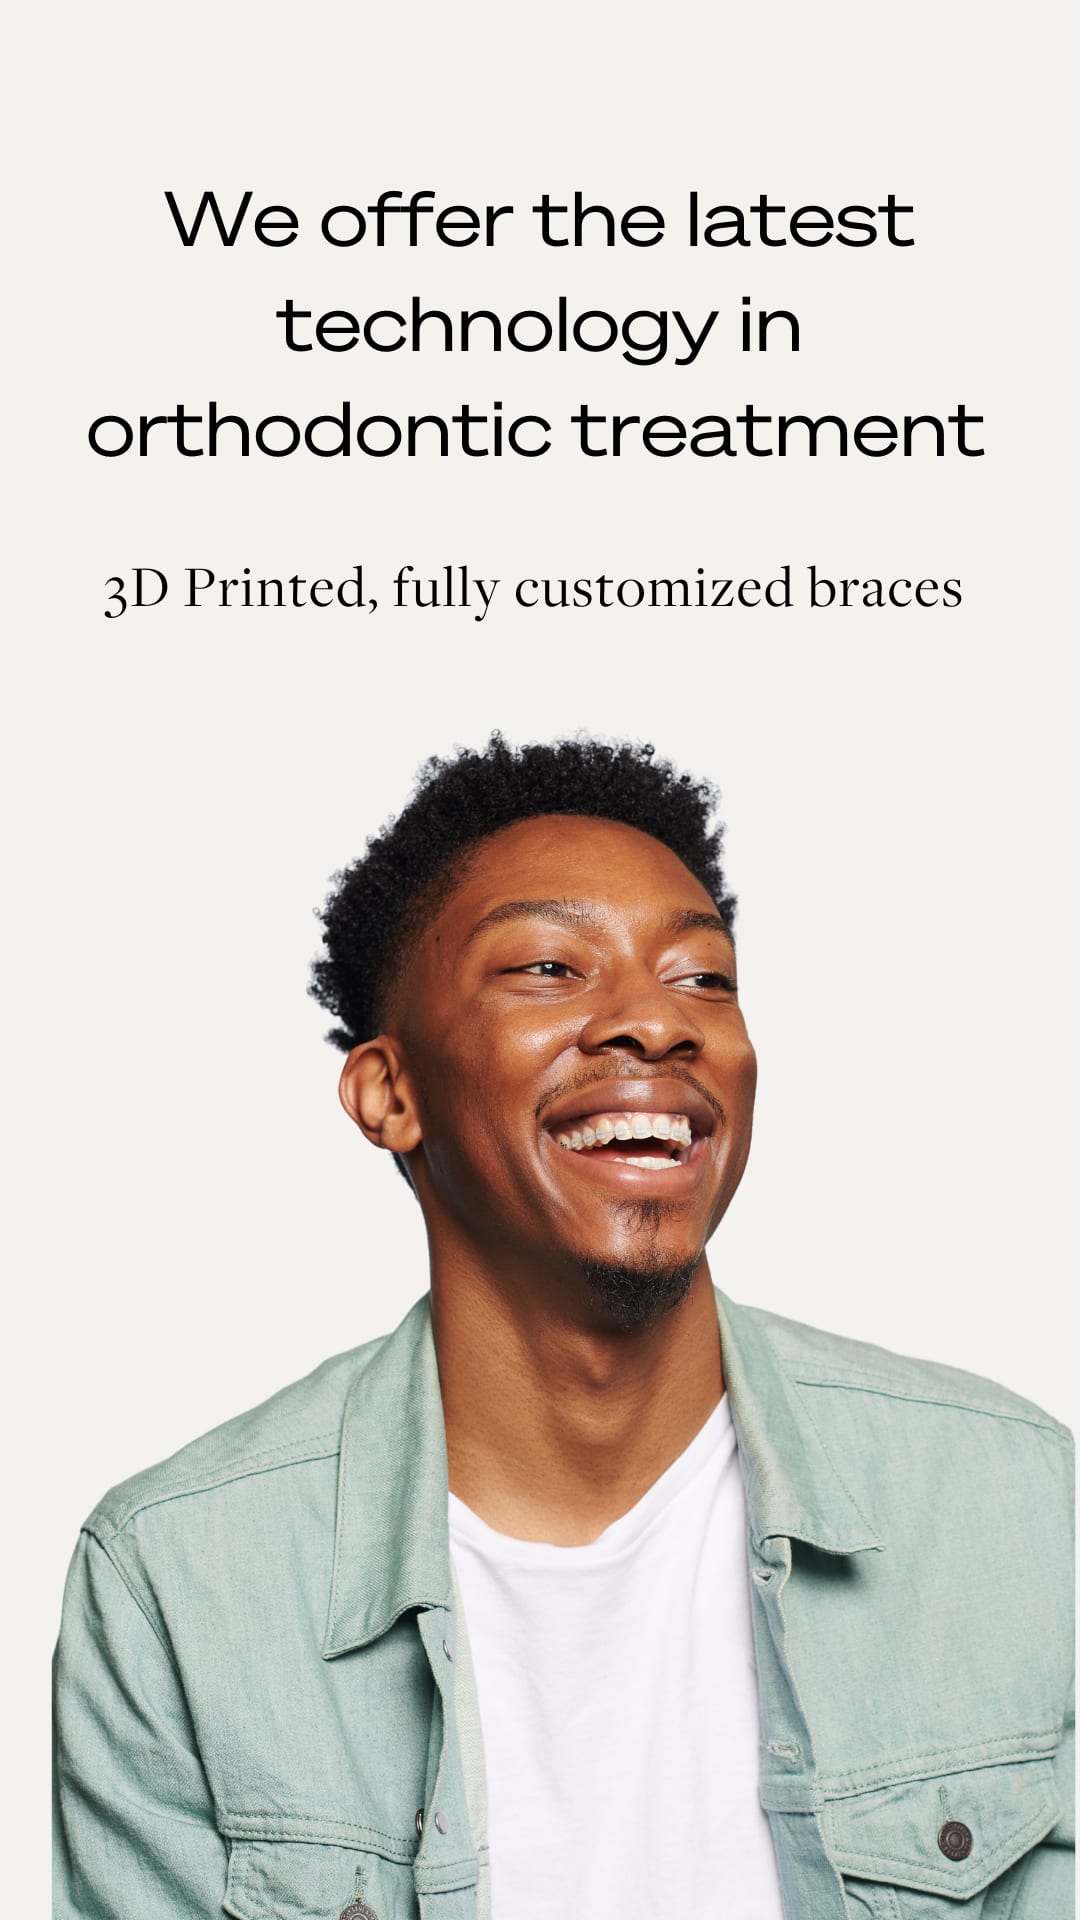 We offer the latest in orthodontic treatment 2